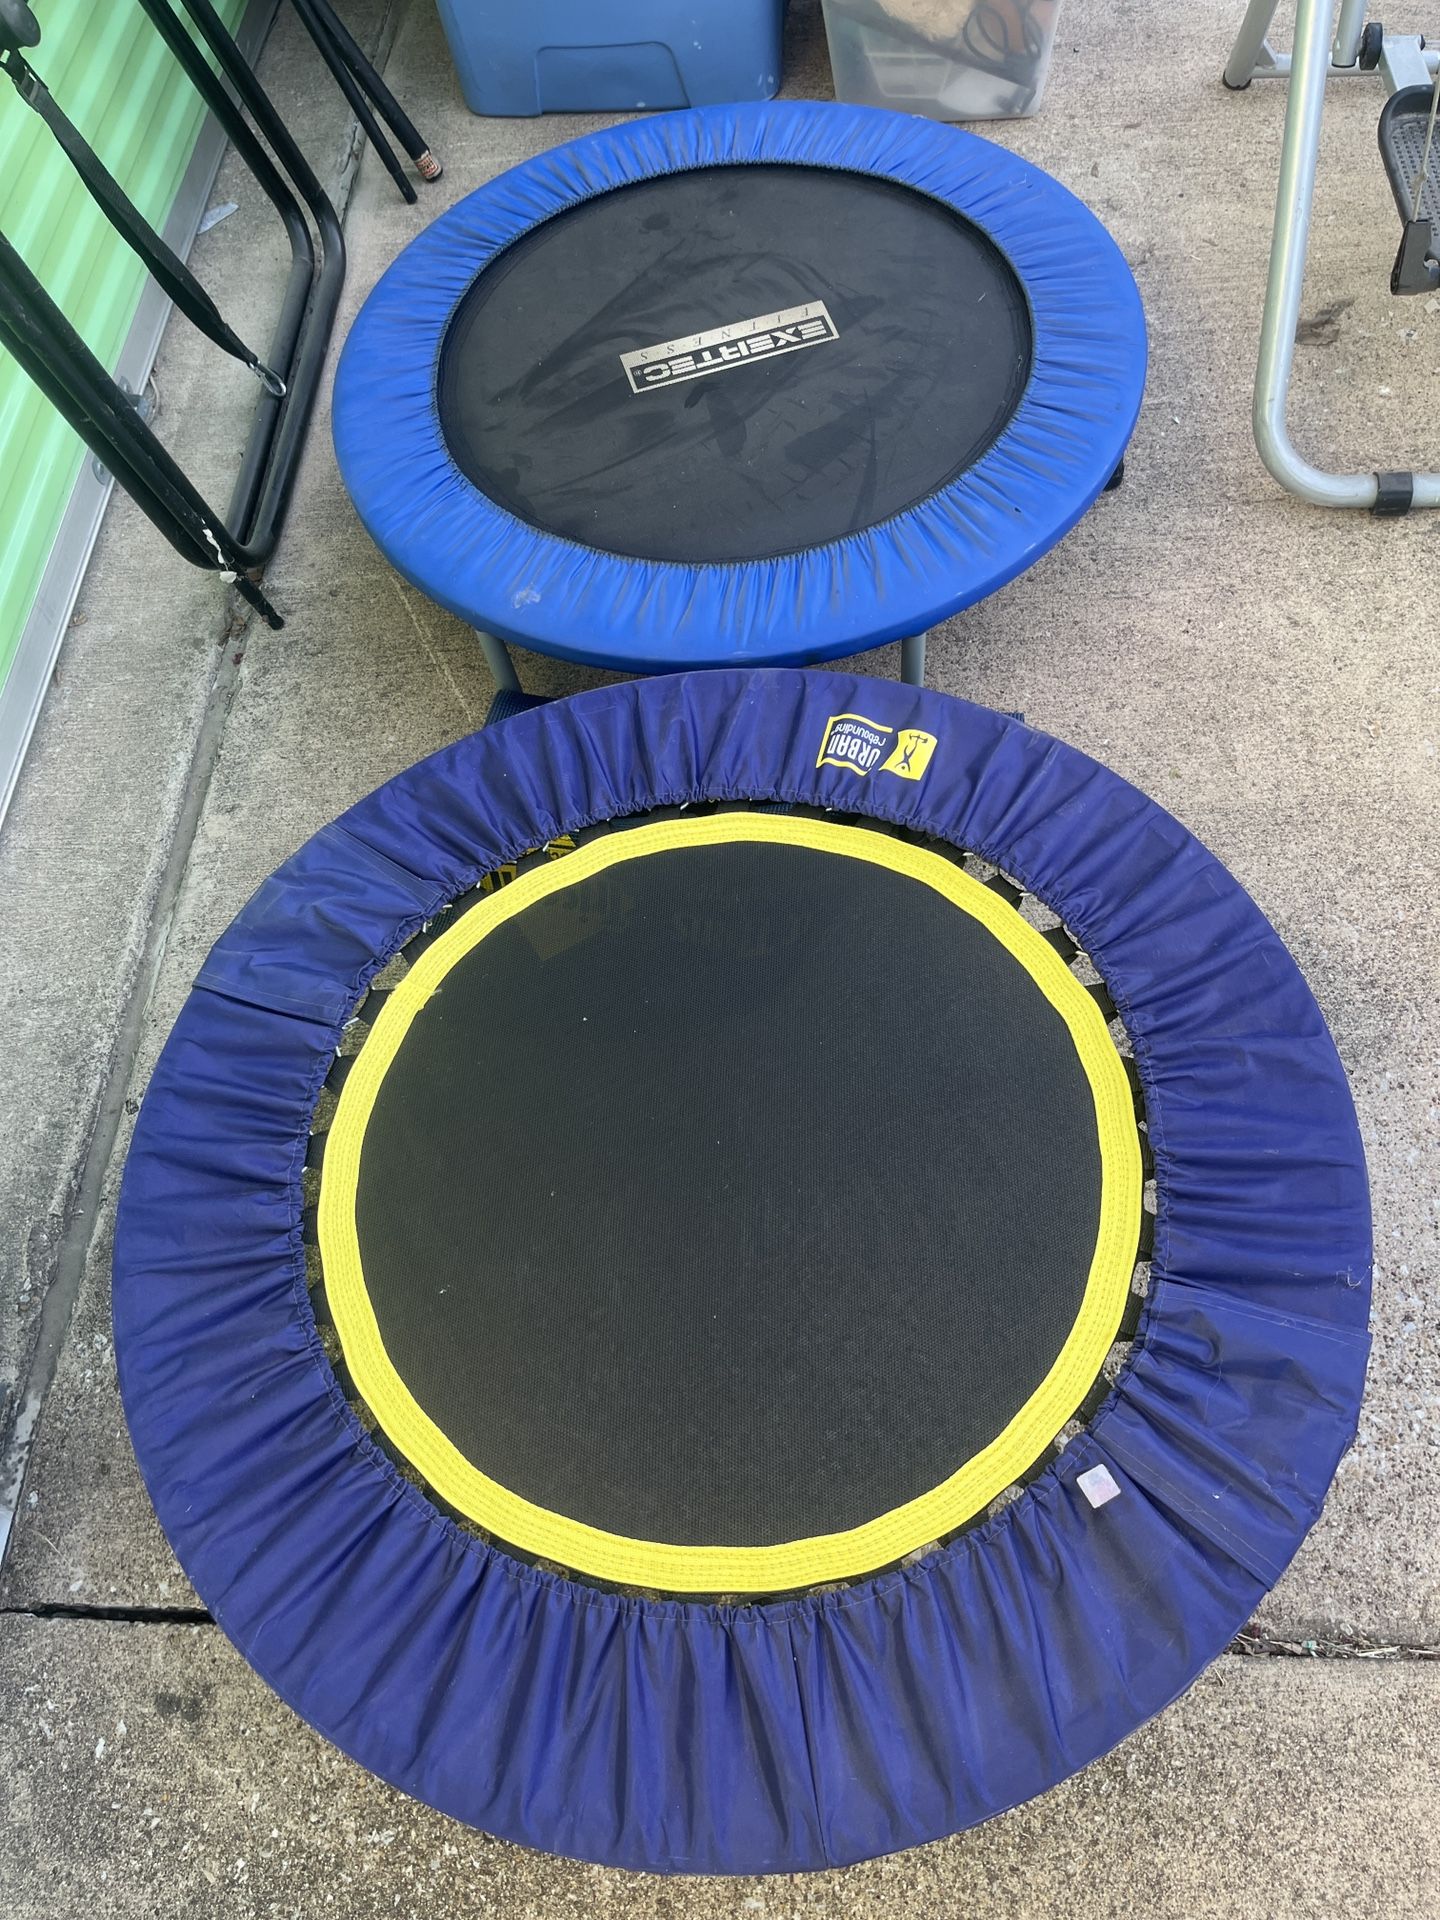 Trampolines $75 Each Or Both For $140